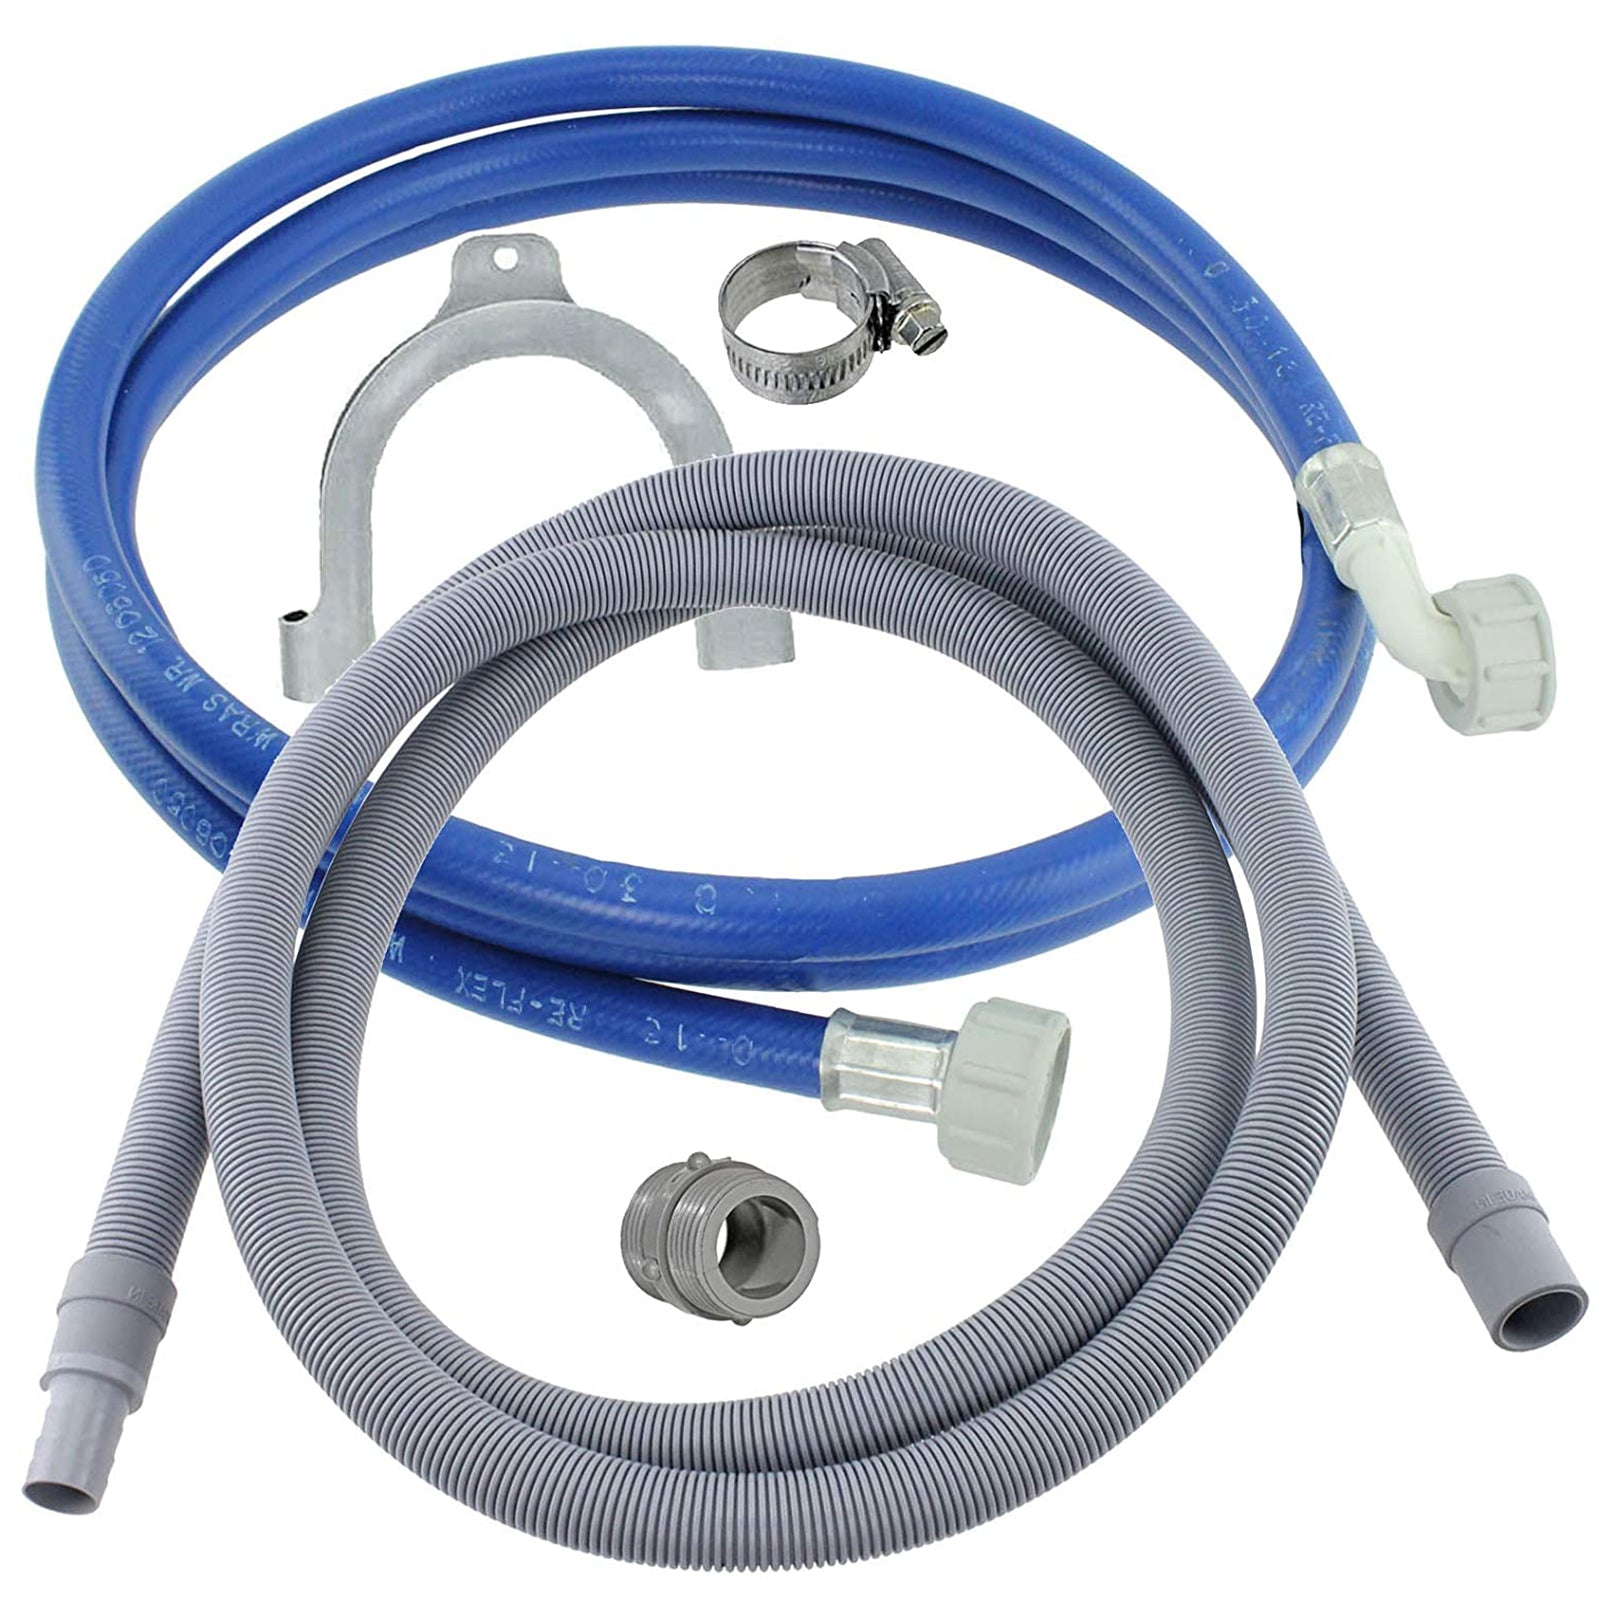 Water Fill Pipe & Drain Hose Extension Kit for Proline Washing Machine Dishwasher (2.5m, 18mm / 22mm)